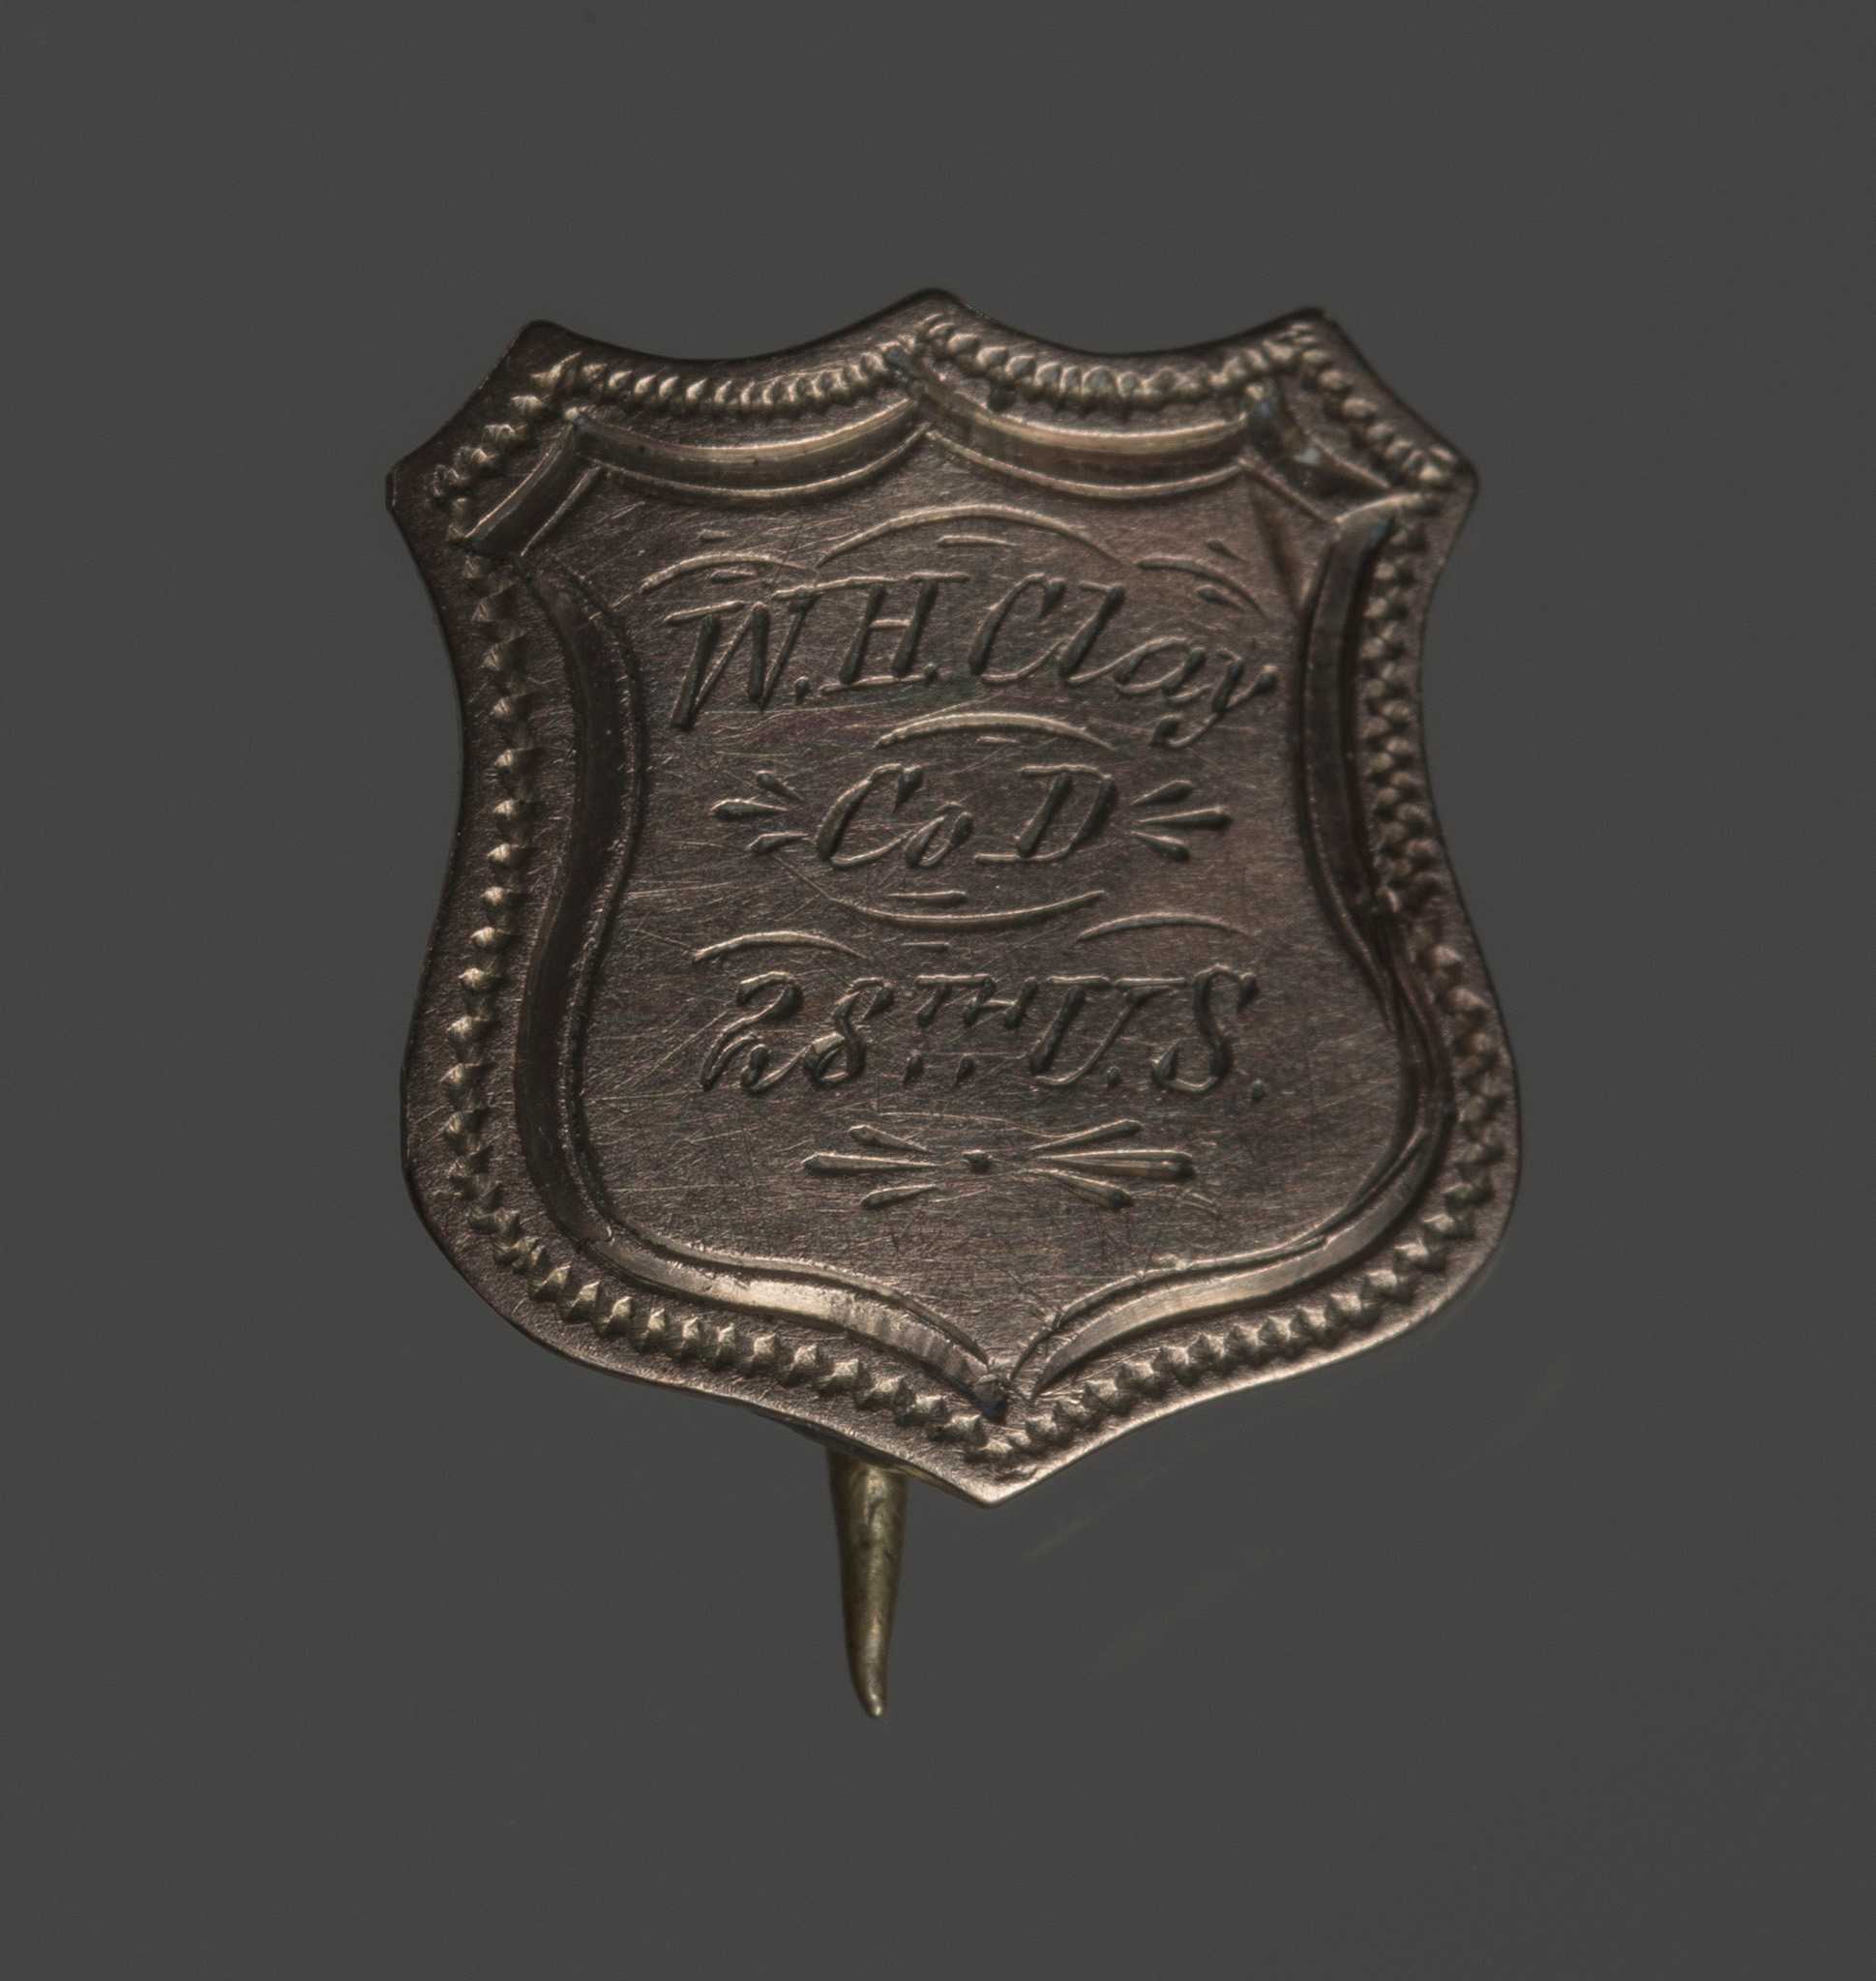 A shield-shaped silver metal badge with stick-pin back. The badge decorative borders around the edge and is engraved in the center: "W. H. Clay Co. D 28th US."